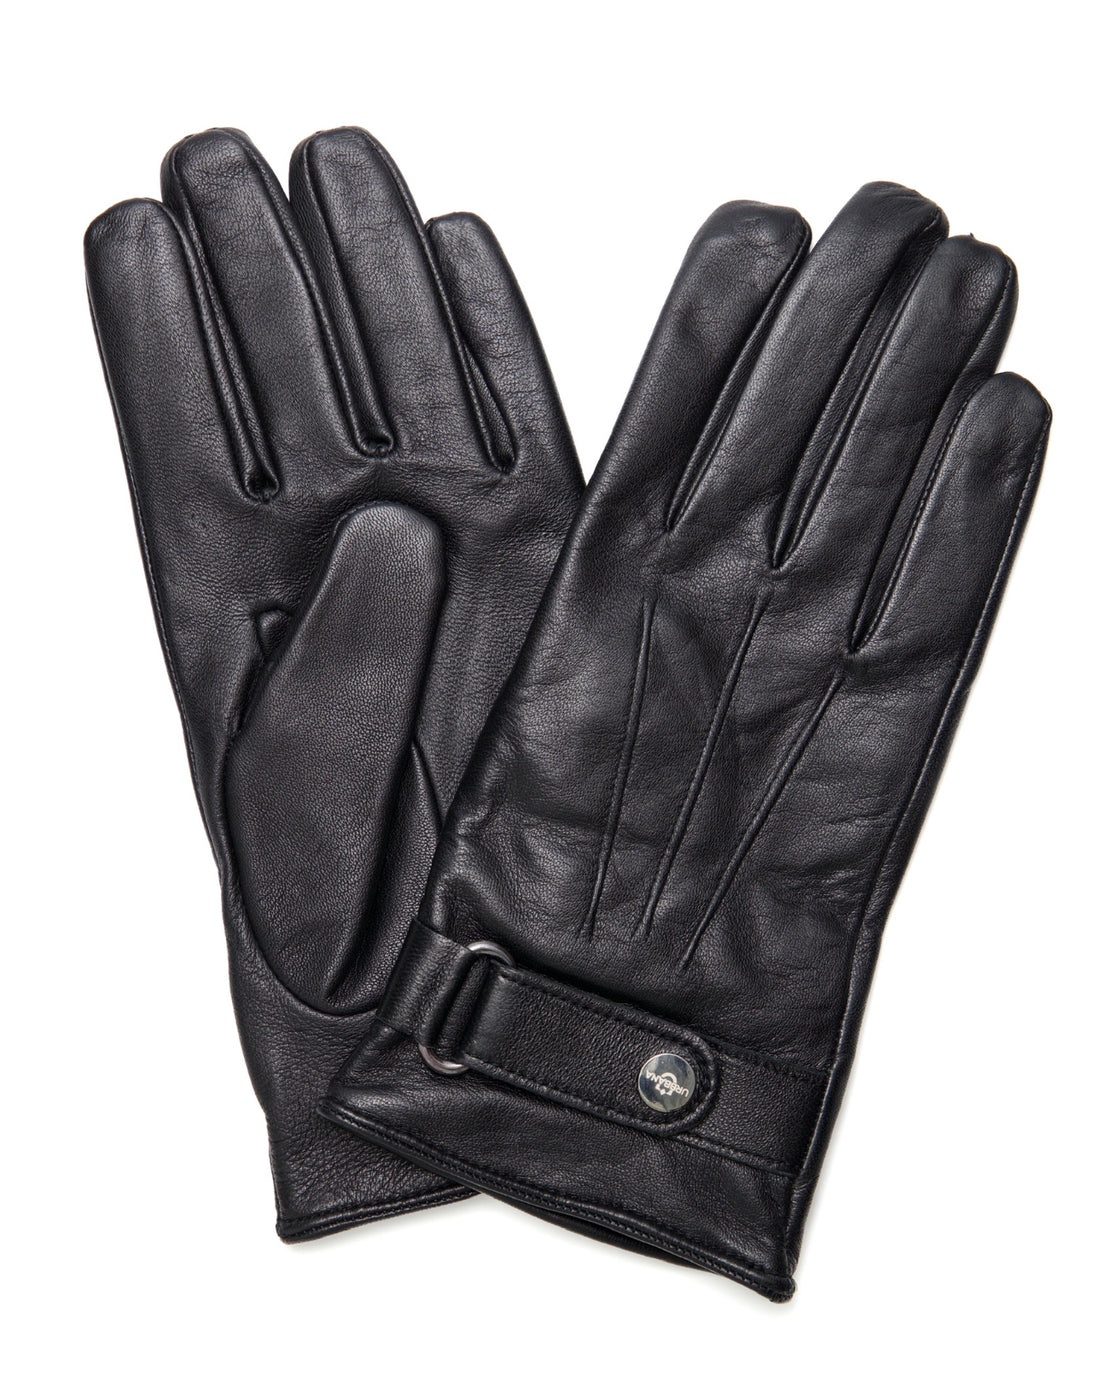 Lambskin Leather Gloves - Black Classic - Gloves by Urbbana